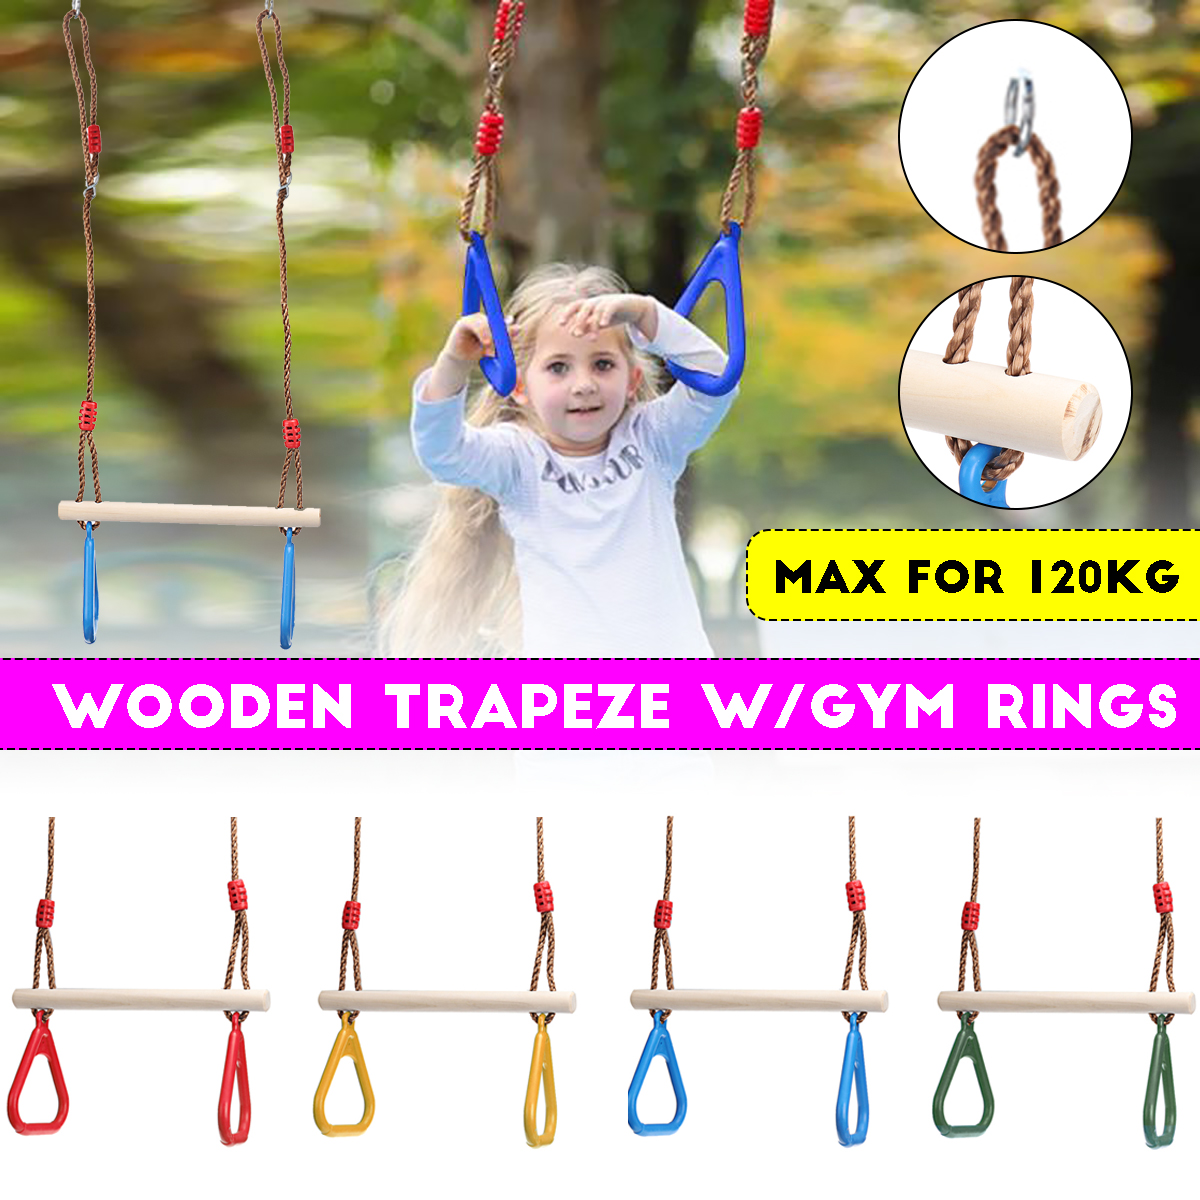 Wooden-Hand-Rings-Climbing-Swing-Seat-Toy-Outdoor-Sports-Fitness-Children-Supplies-Disc-Monkey-Kids--1795979-1